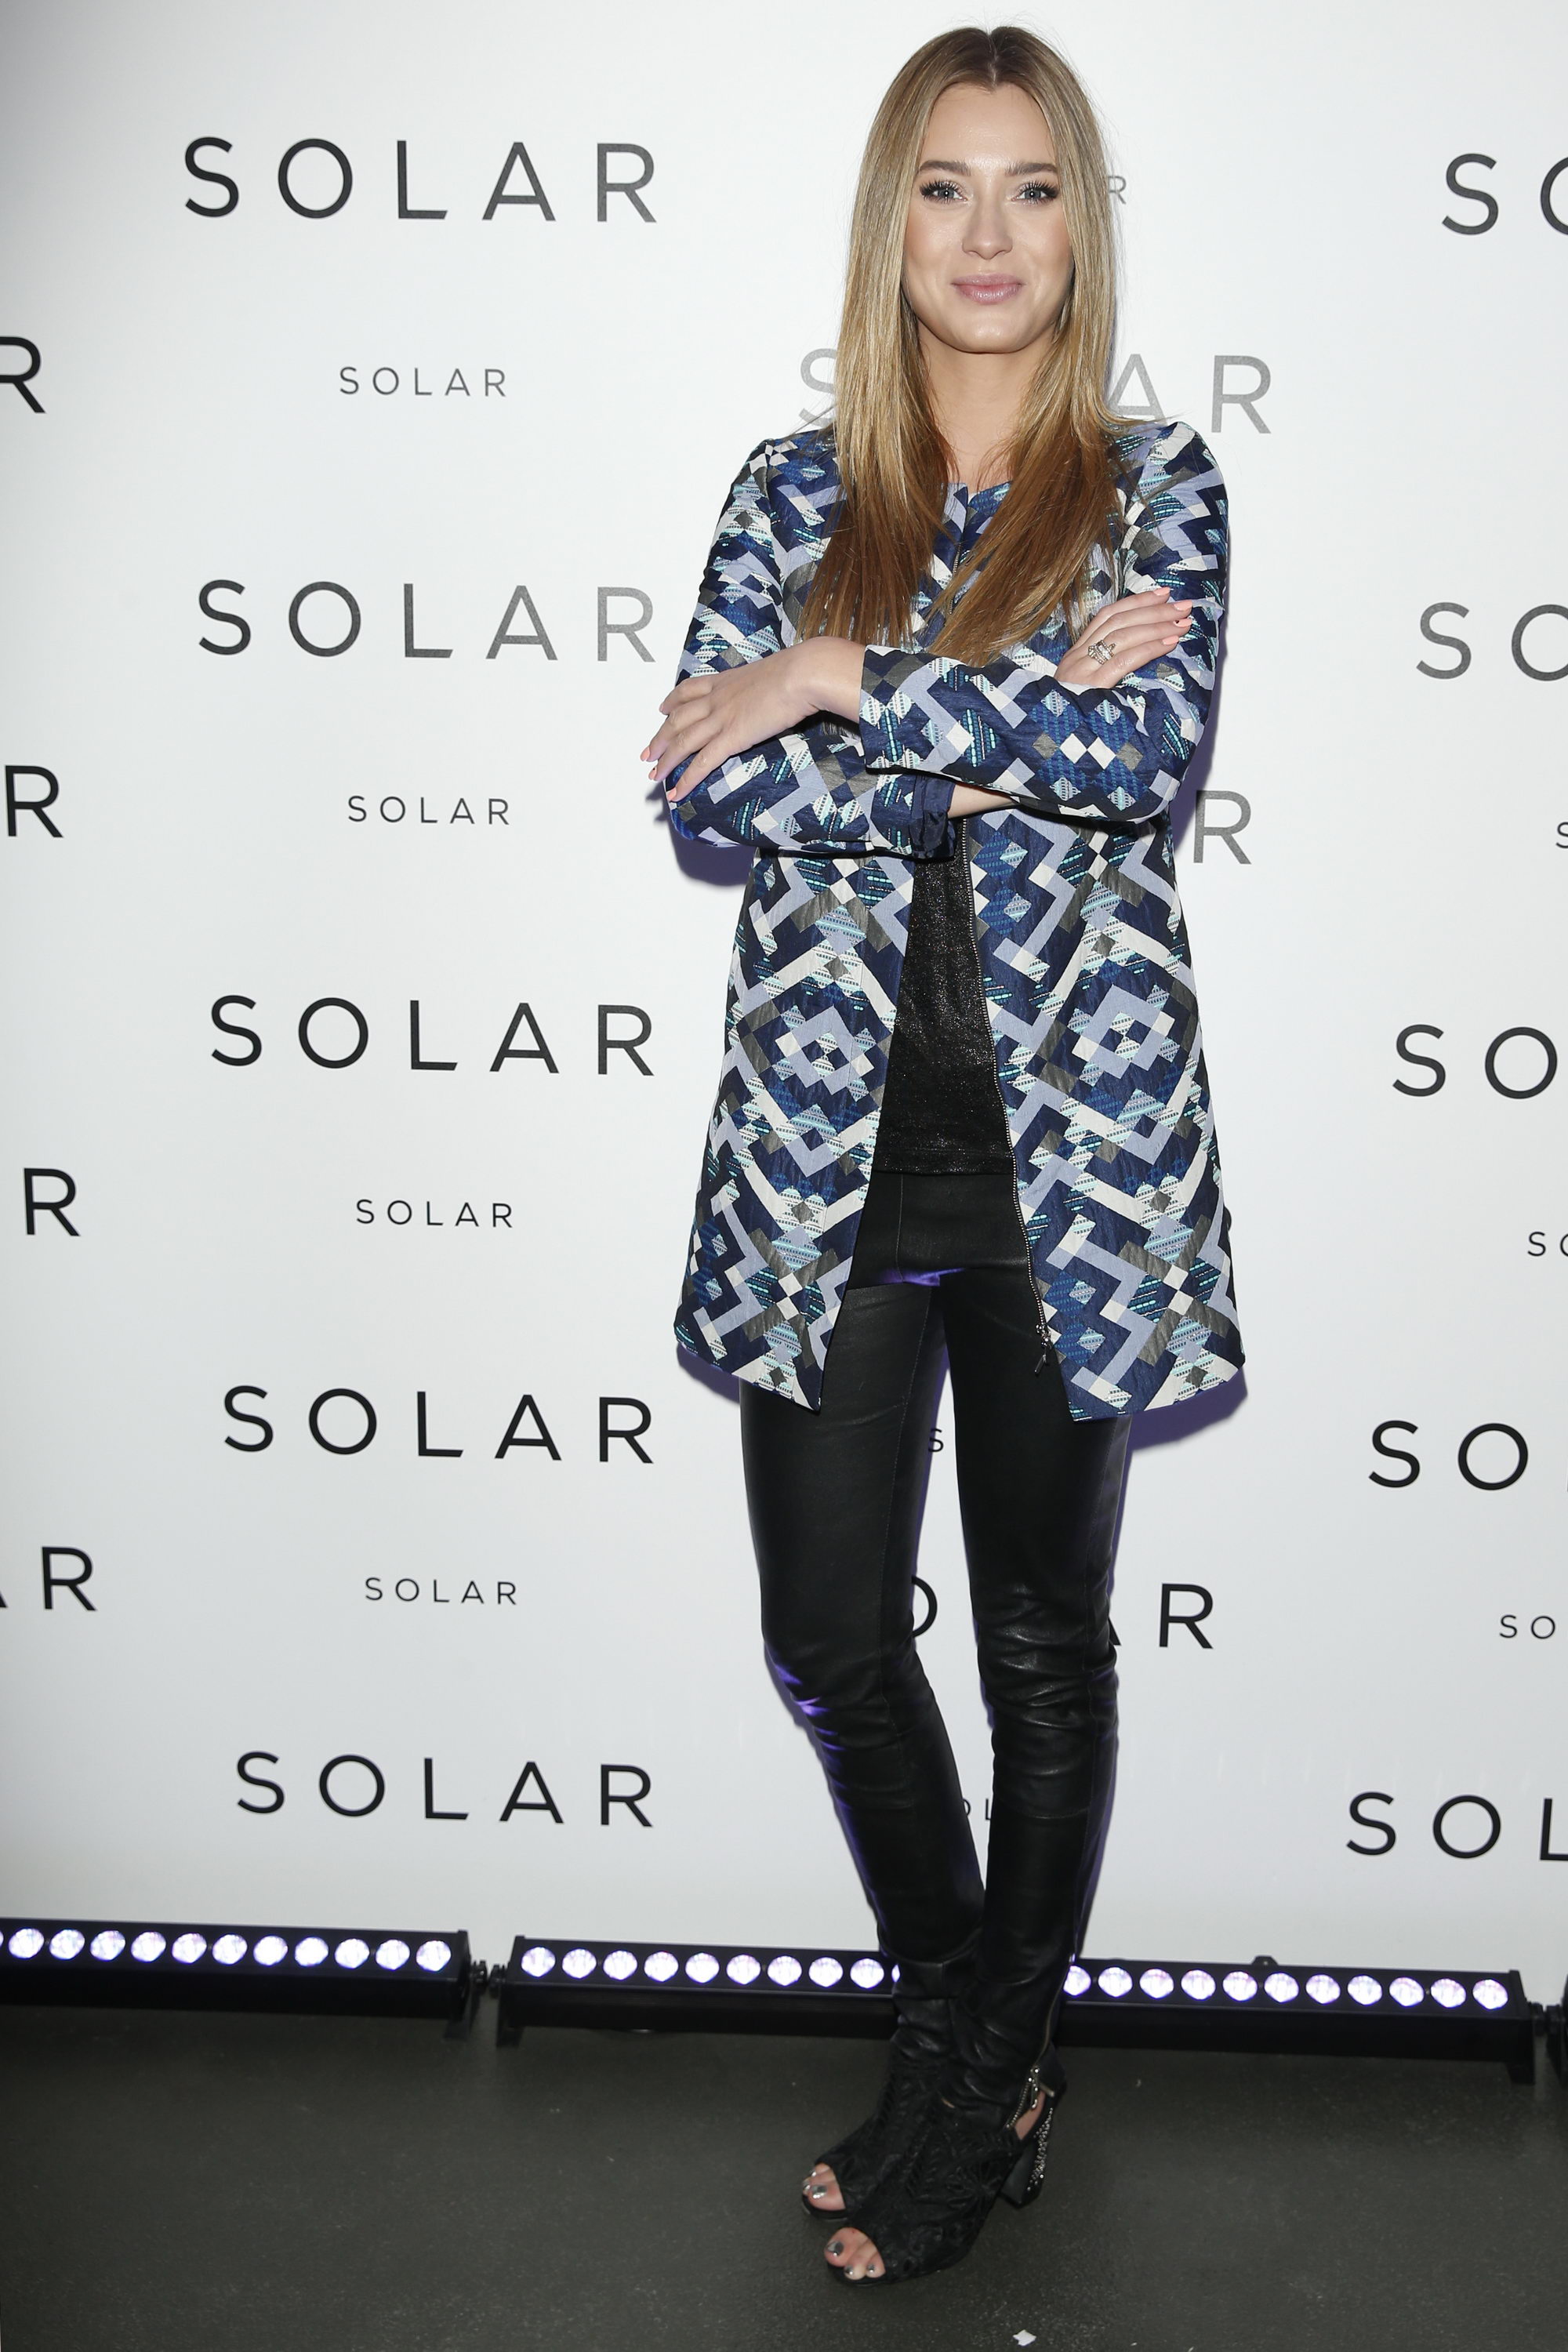 Marcelina Zawadzka attends the press day for the SOLAR F/W 17/18 collection